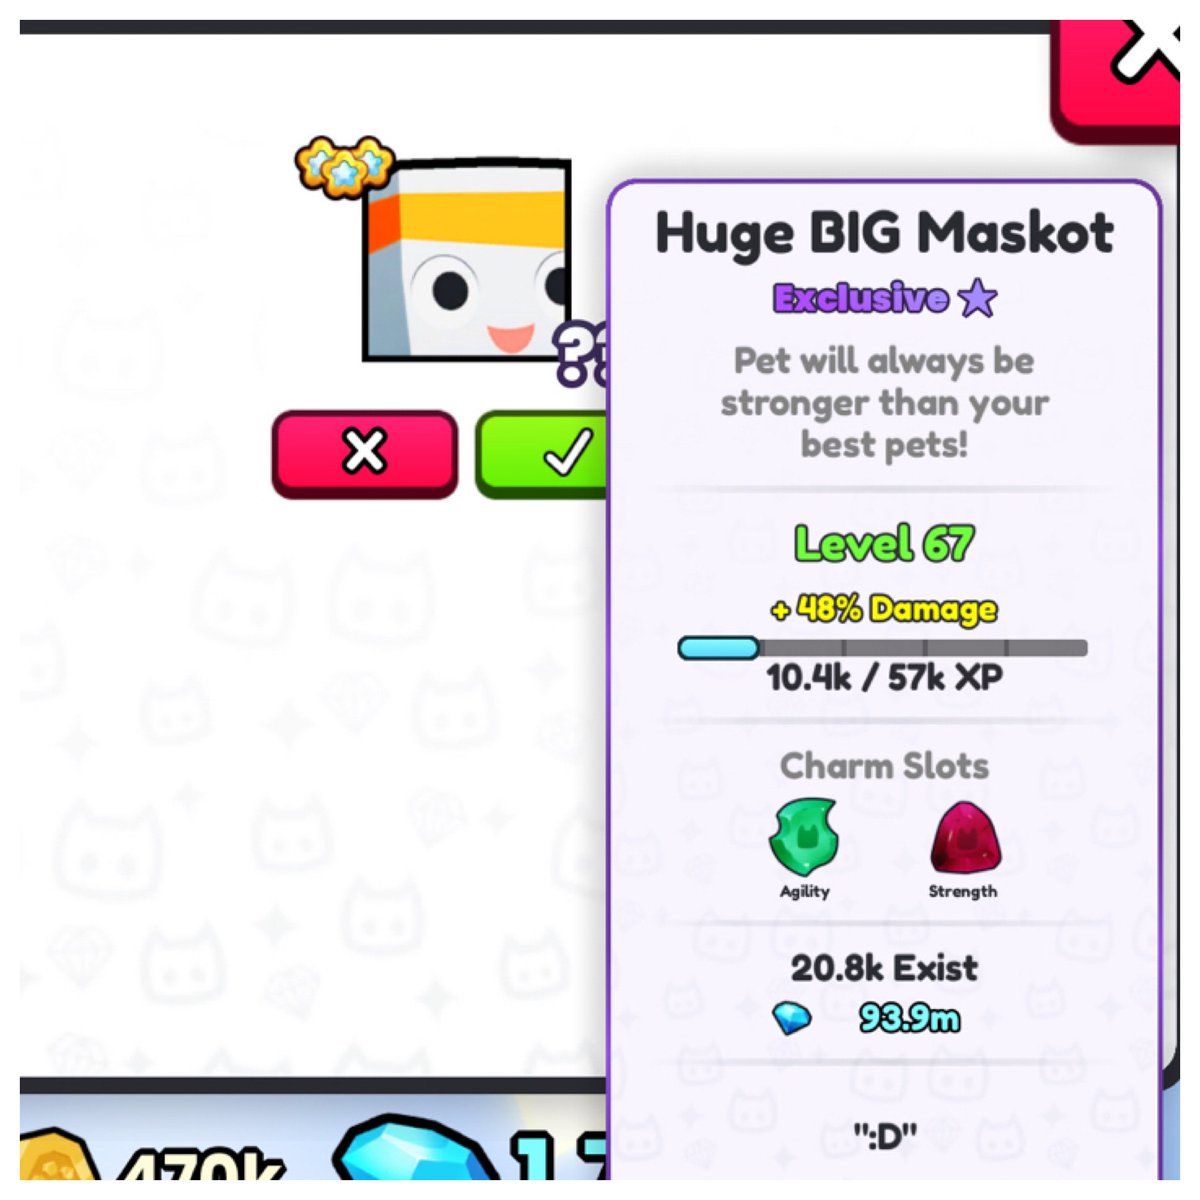 ✨Huge Give-away✨

Tysm for to my friend @Dalexander0102 for this amazing prize 🧡

Giving away a Huge Big Maskot to 1x winner

To enter:
✨like & share
🧡 follow me & @Dalexander0102 
✨ comment ur favorite PS99 huge 

Ends on 5/16 & gl 🍀🍀